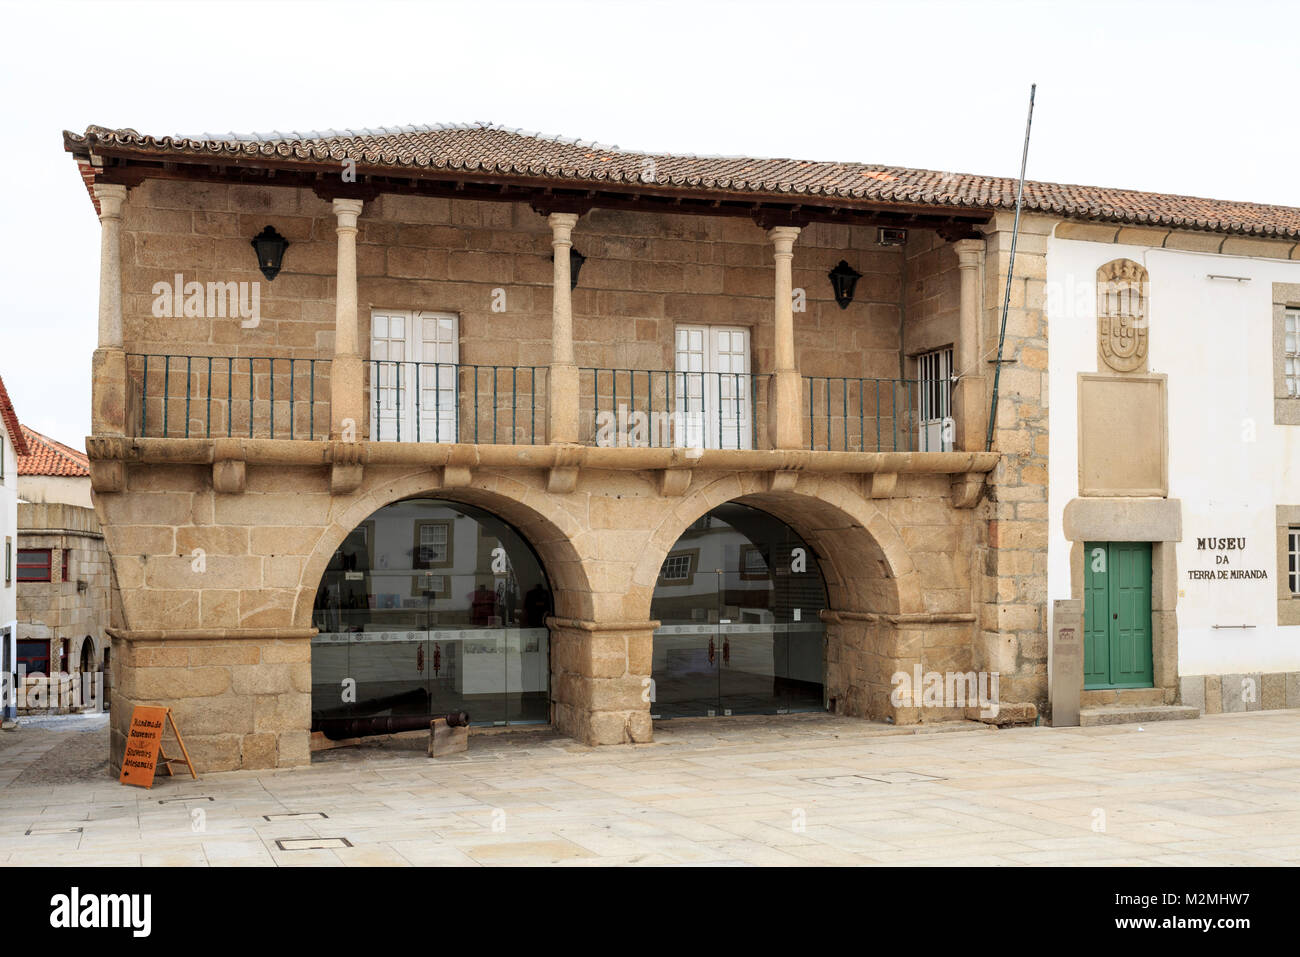 The Land of Miranda Museum is housed in the seventeenth century building of the fomer city hall, the Domus Municipalis, in Miranda do Douro, Portugal Stock Photo